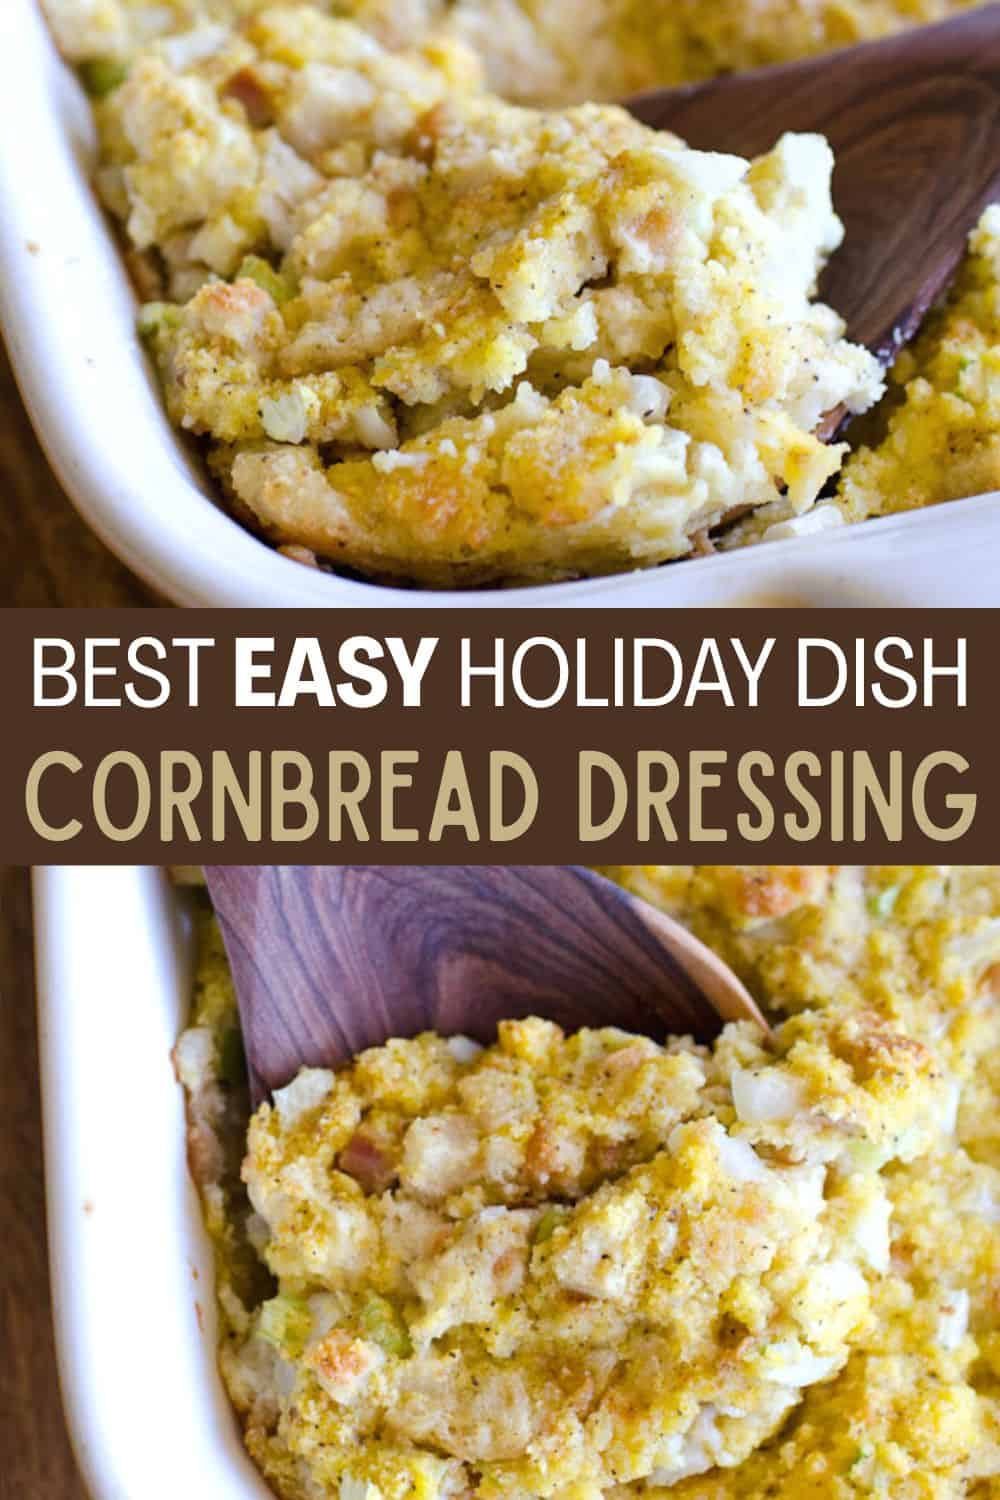 This easy cornbread dressing is the perfect dressing recipe for the holidays! There is nothing more comforting than this moist and delicious side dish for Thanksgiving and Christmas.